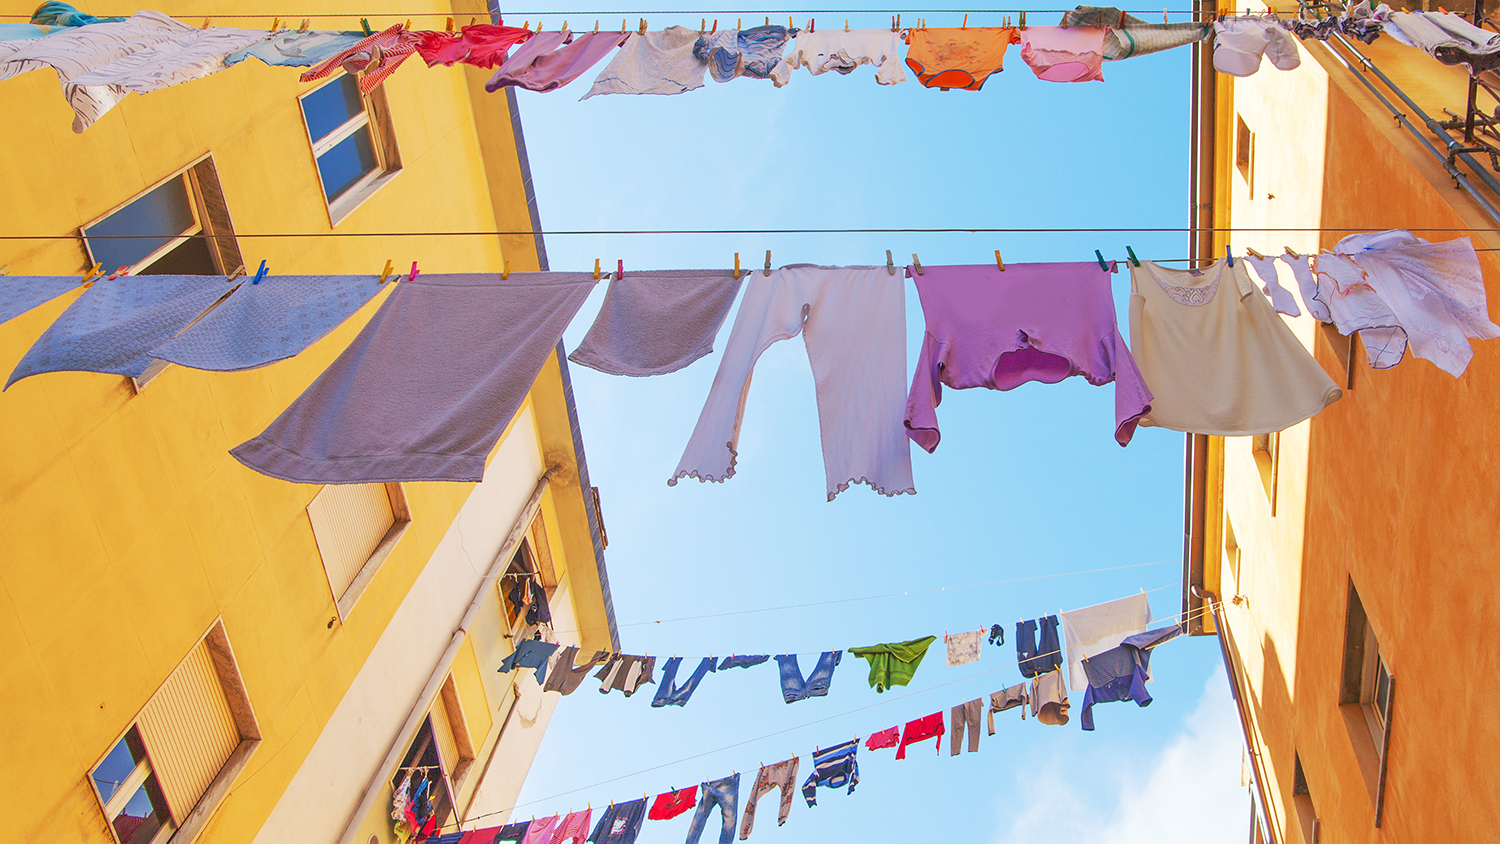 Laundry on lines